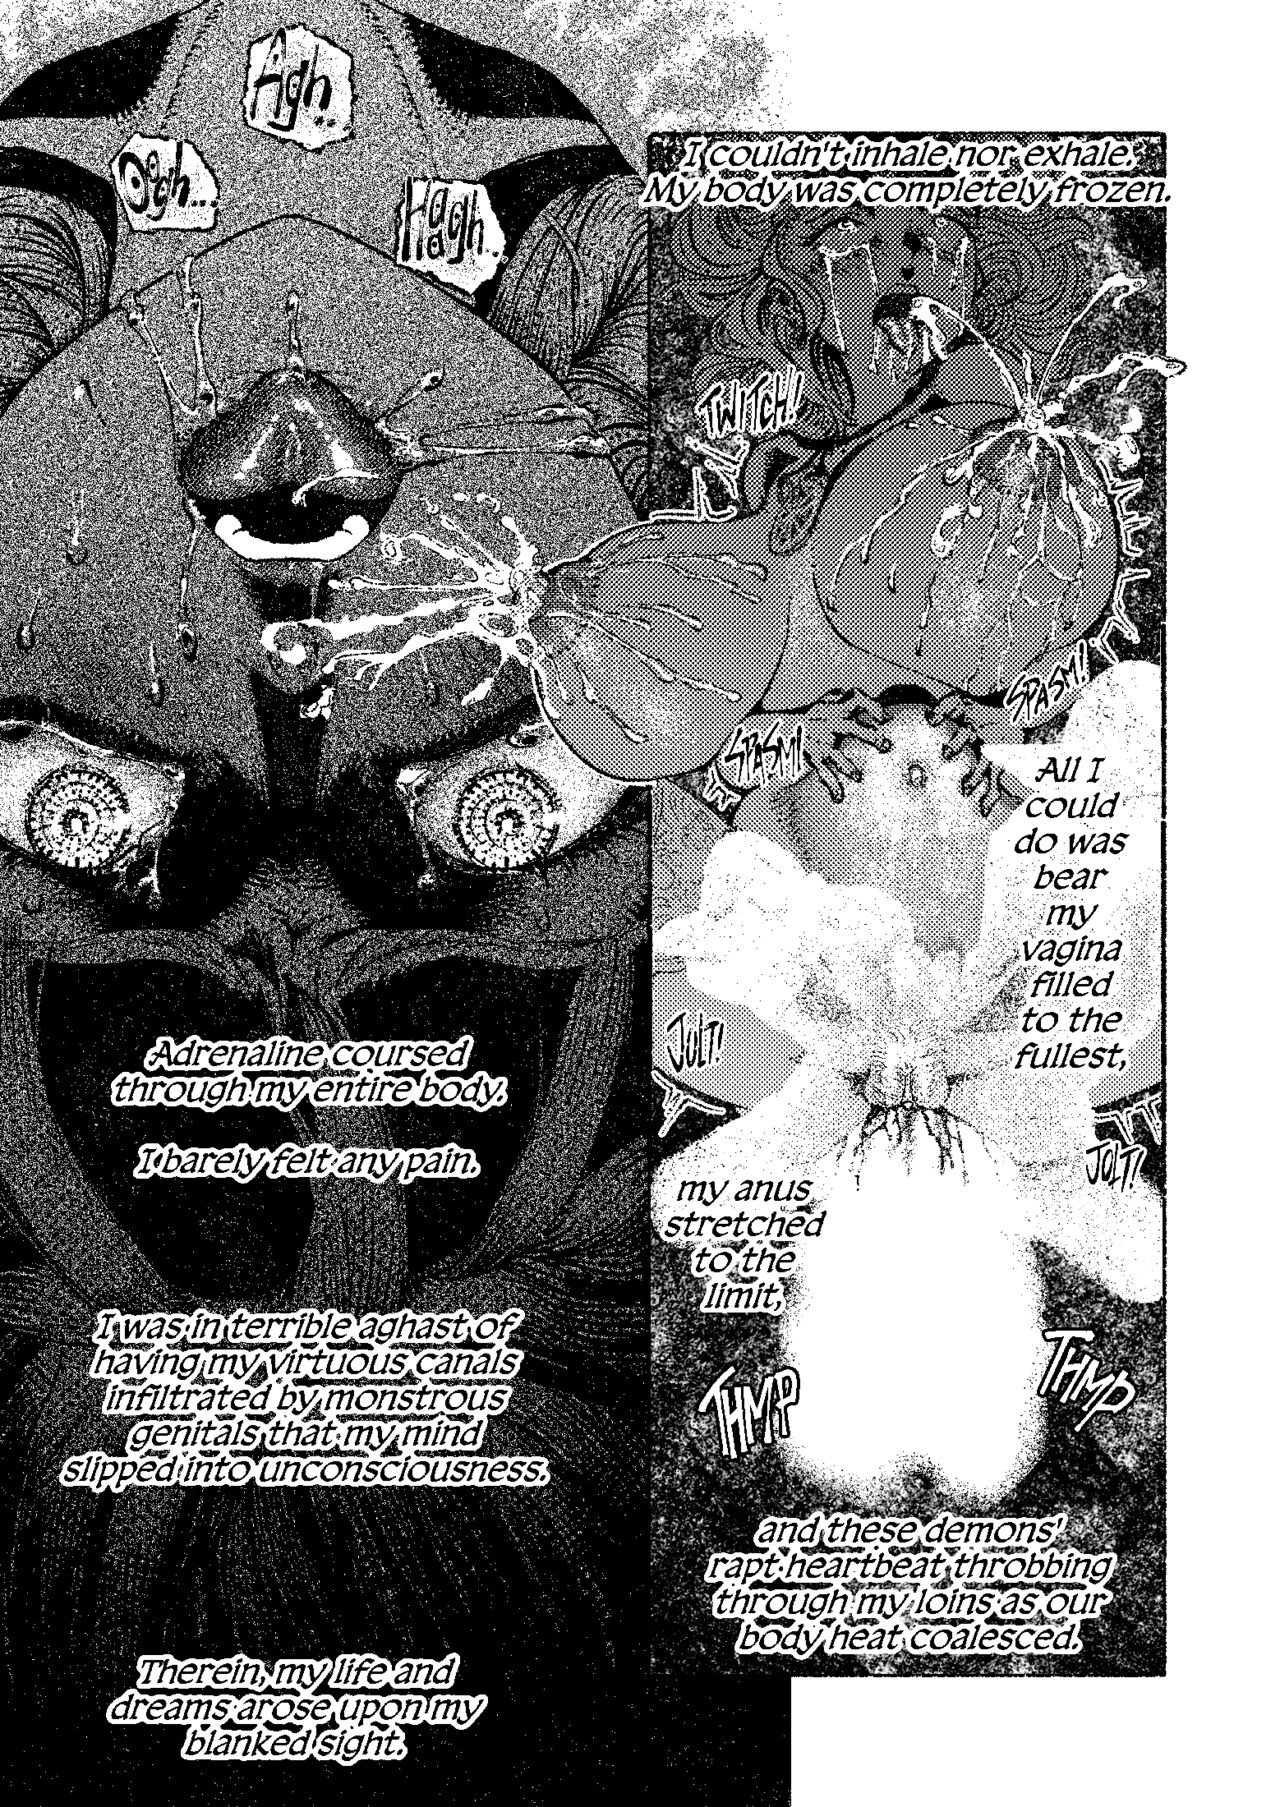 [Edrix3] The Record of Greened Pearls ~The Bestial Gangbang of a Buxomly Senxual Acolyte Girl~ (Goblin Slayer) 10